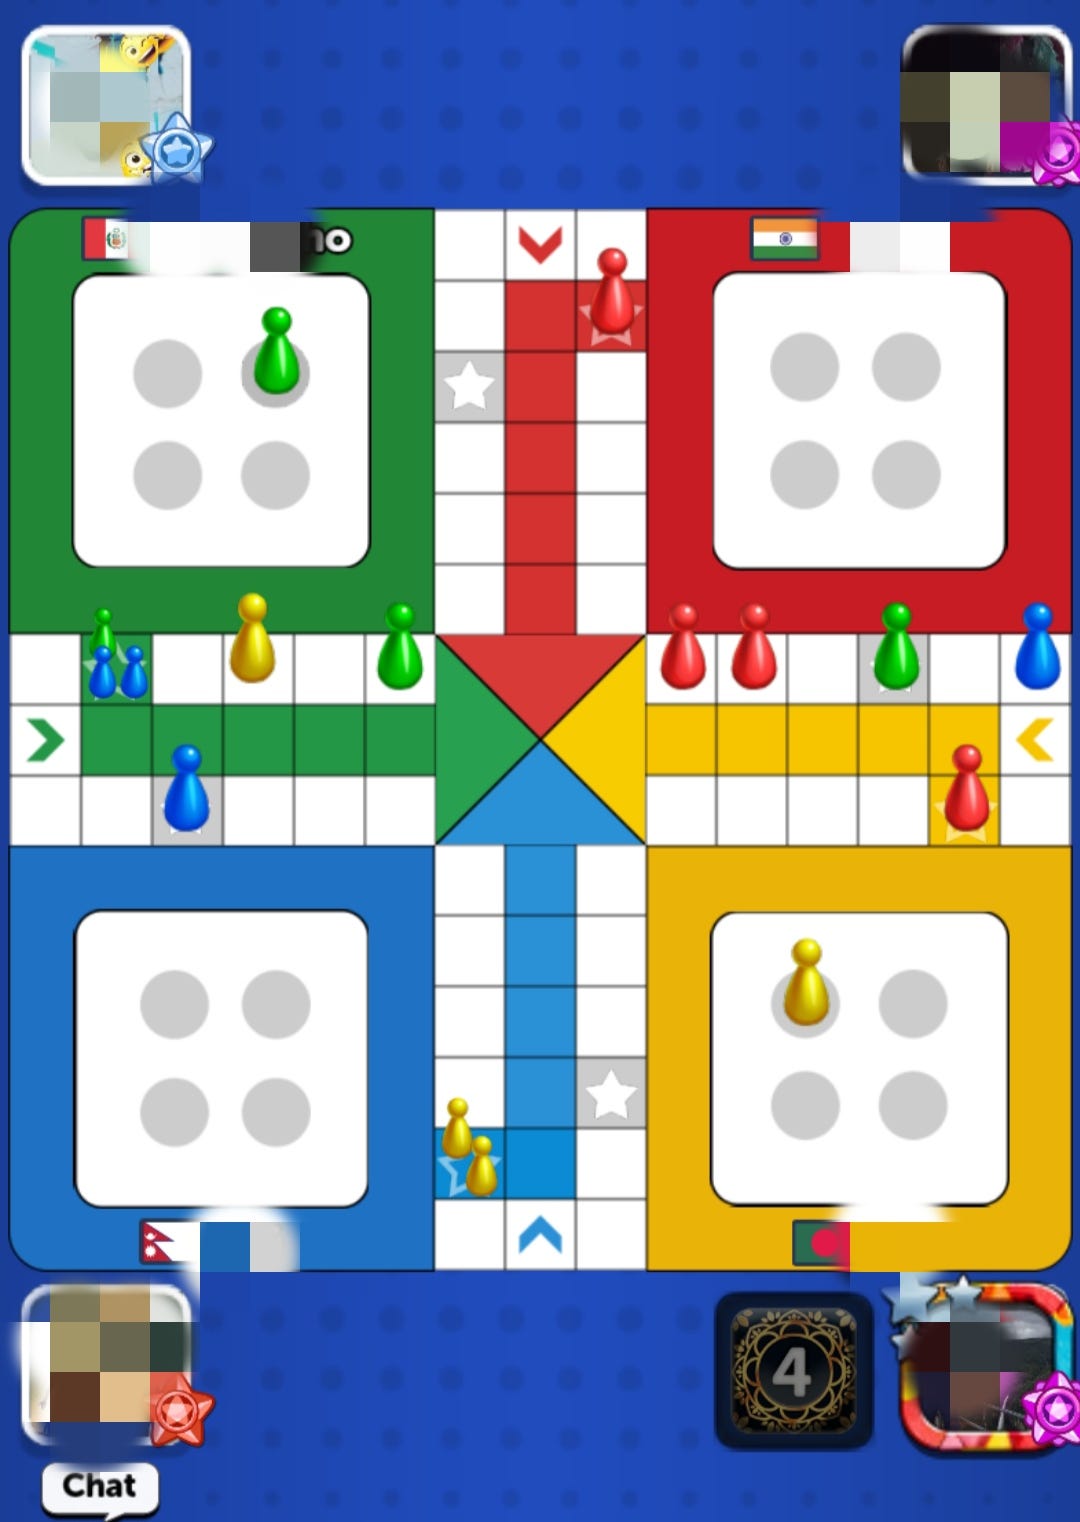 How to Play Ludo Club with your Facebook Friends